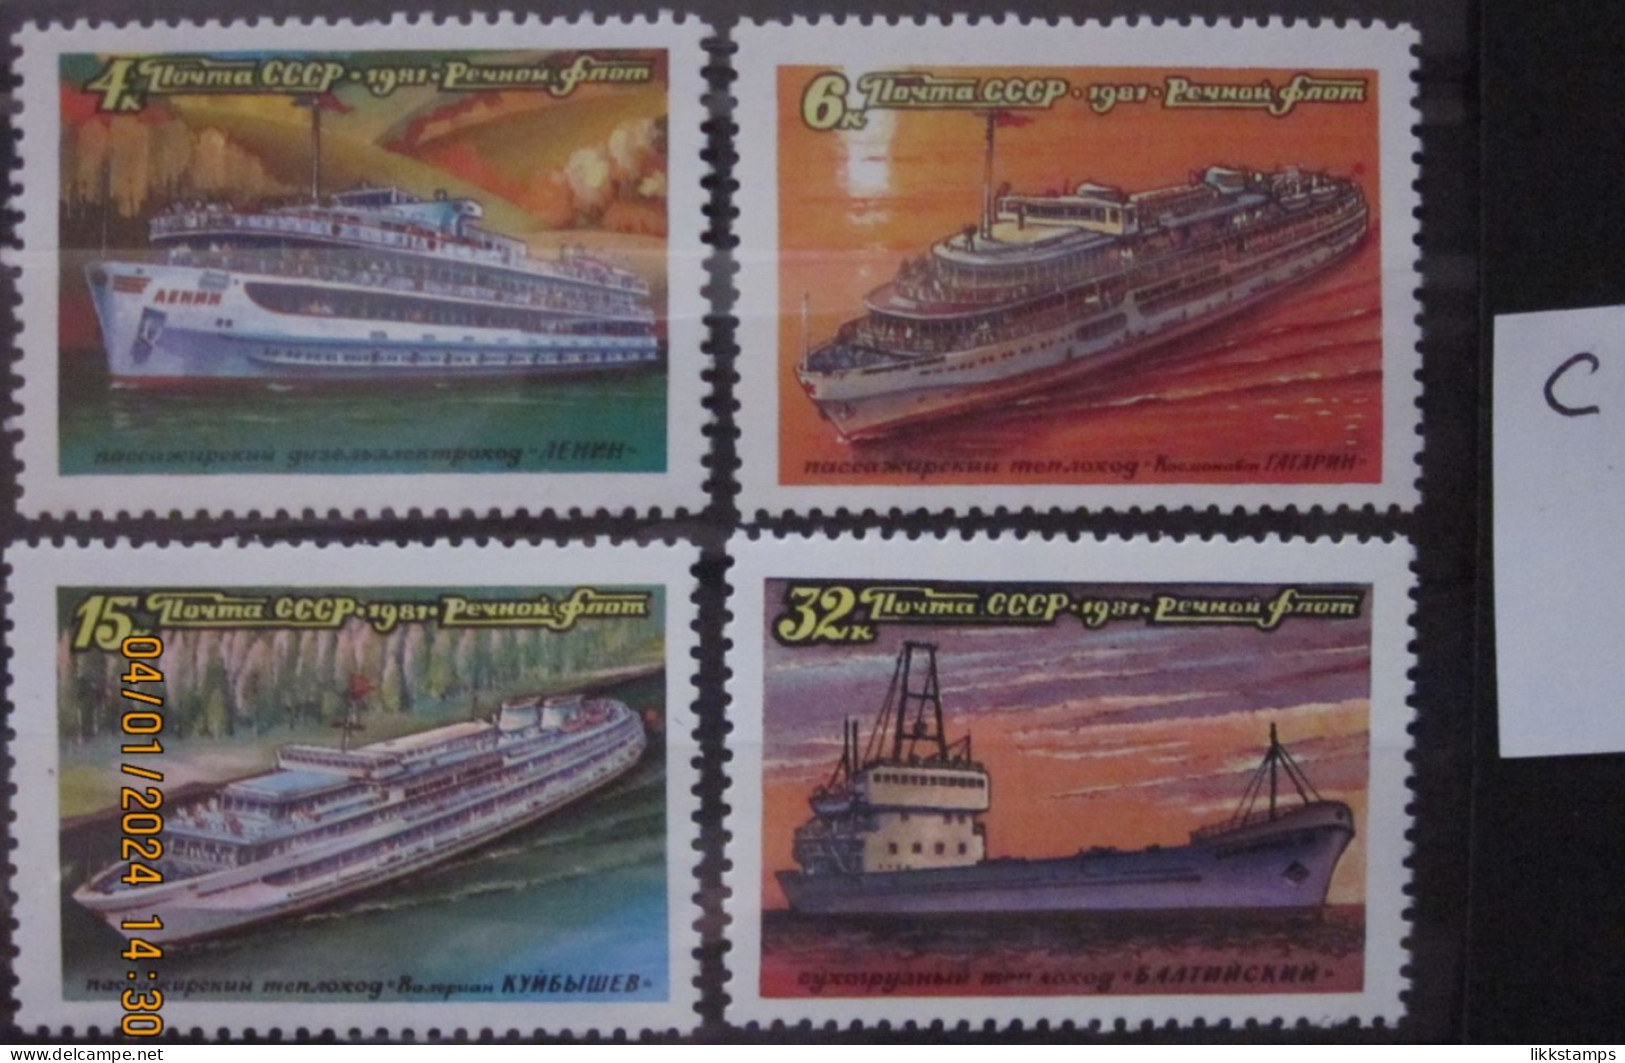 RUSSIA ~ 1981 ~ S.G. NUMBERS 5143 - 5146, ~ 'LOT C' ~ RIVER SHIPS. ~ MNH #03621 - Nuevos